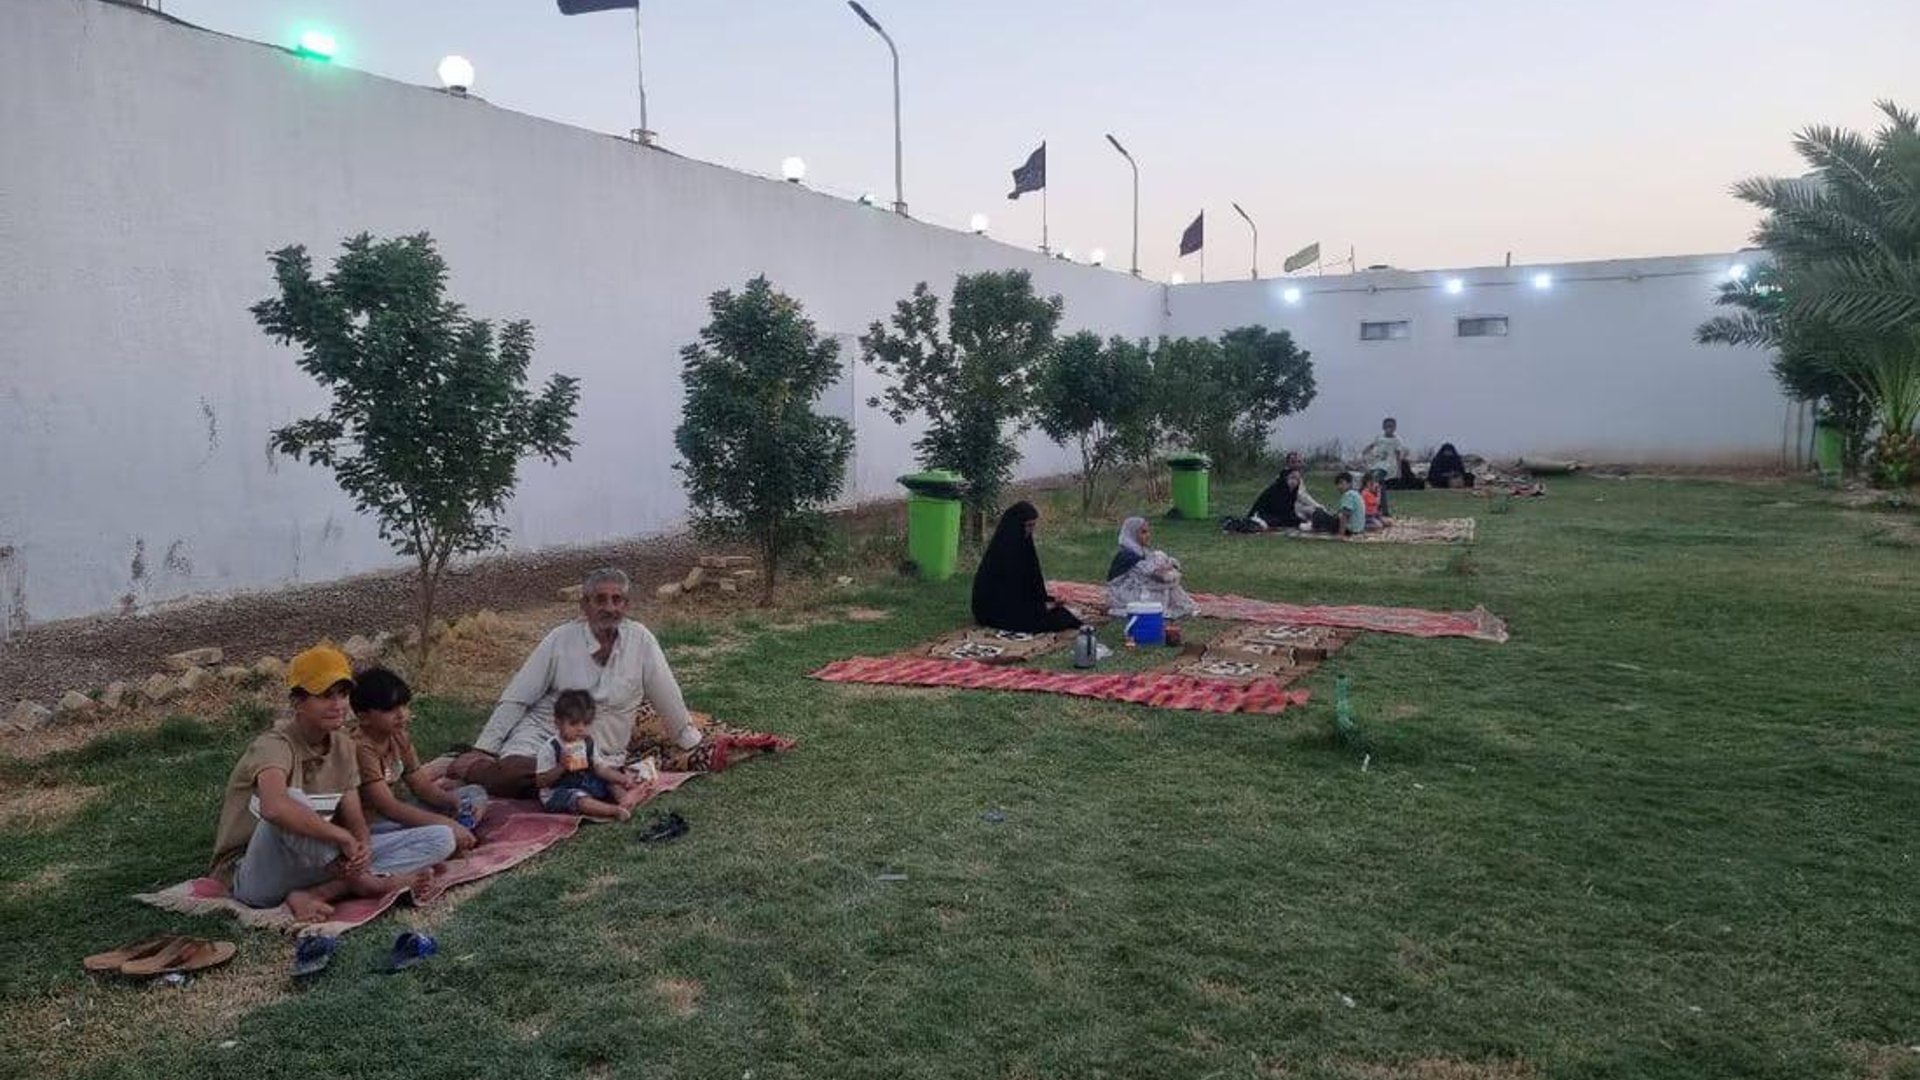 Religious shrine in Dhi Qar draws families looking for green space in absense of a proper park